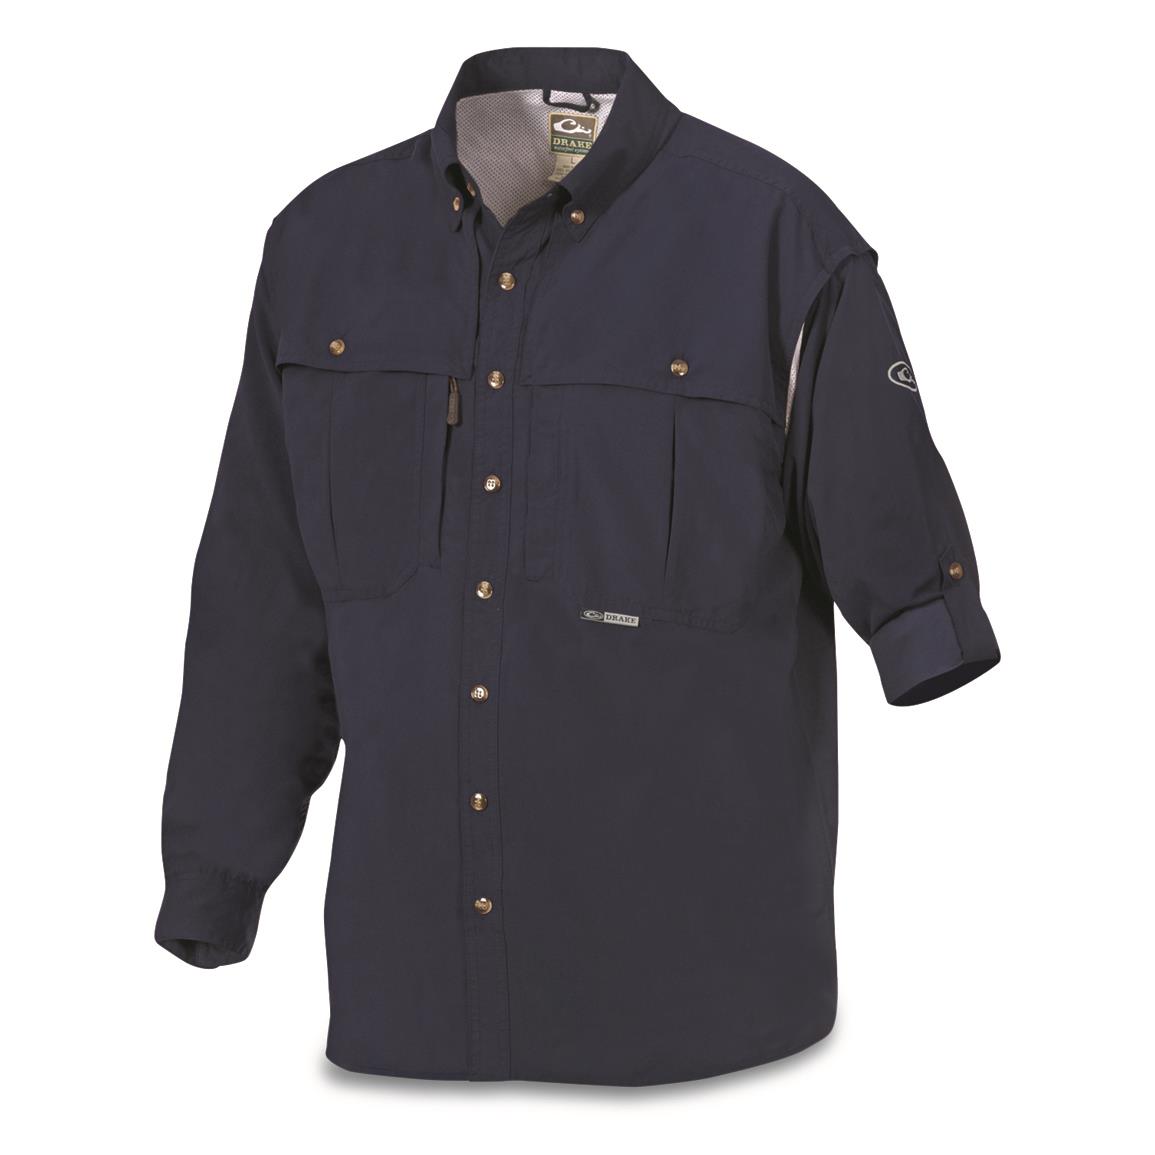 Drake Waterfowl Men's Vented Wingshooter's Shirt, Long-sleeve, Solid Color, Navy